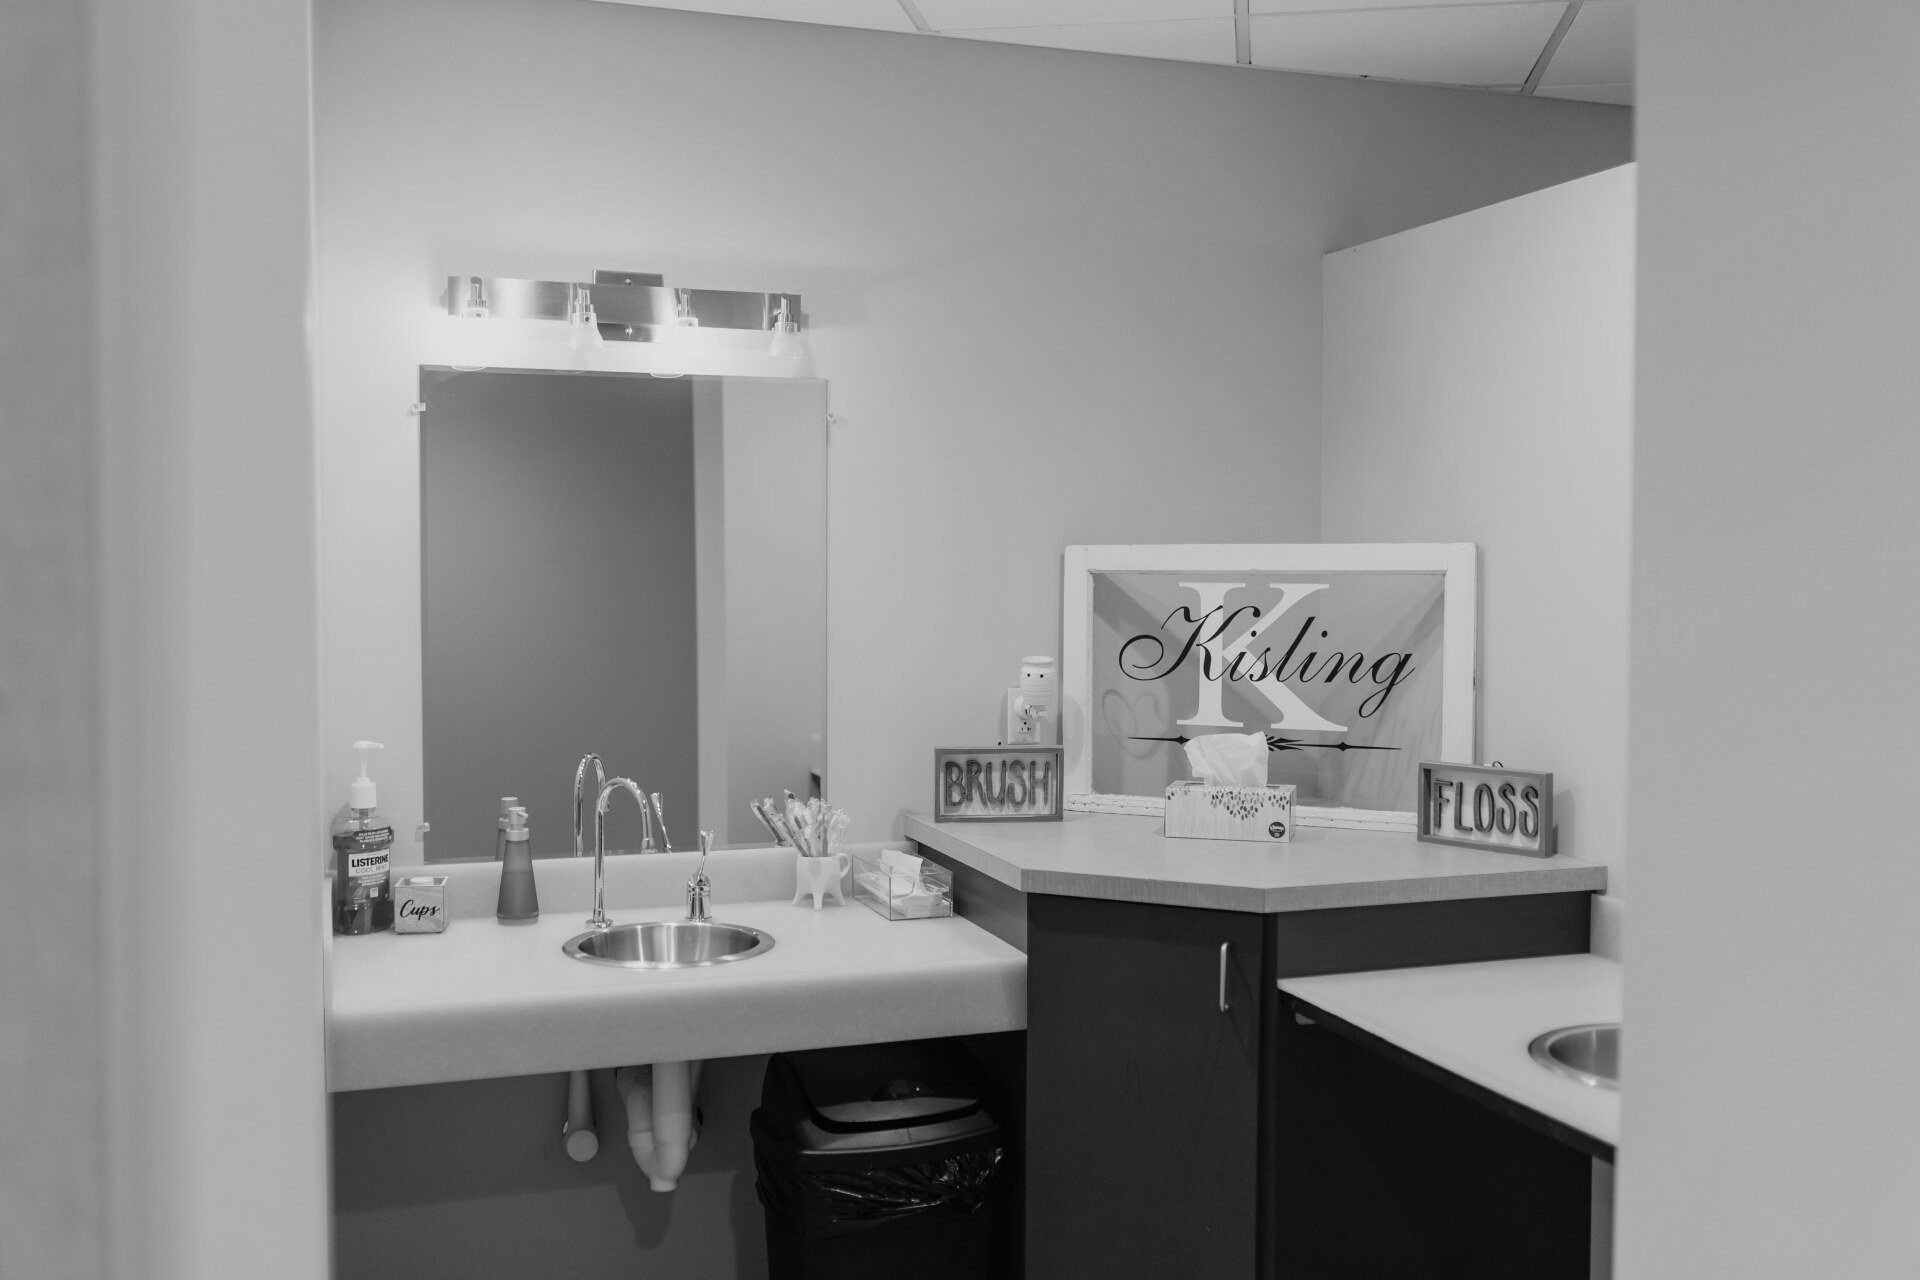  Dental Office Pics | Periodontist, Botox, clear aligners, nutrition counseling | Leawood KS 66209